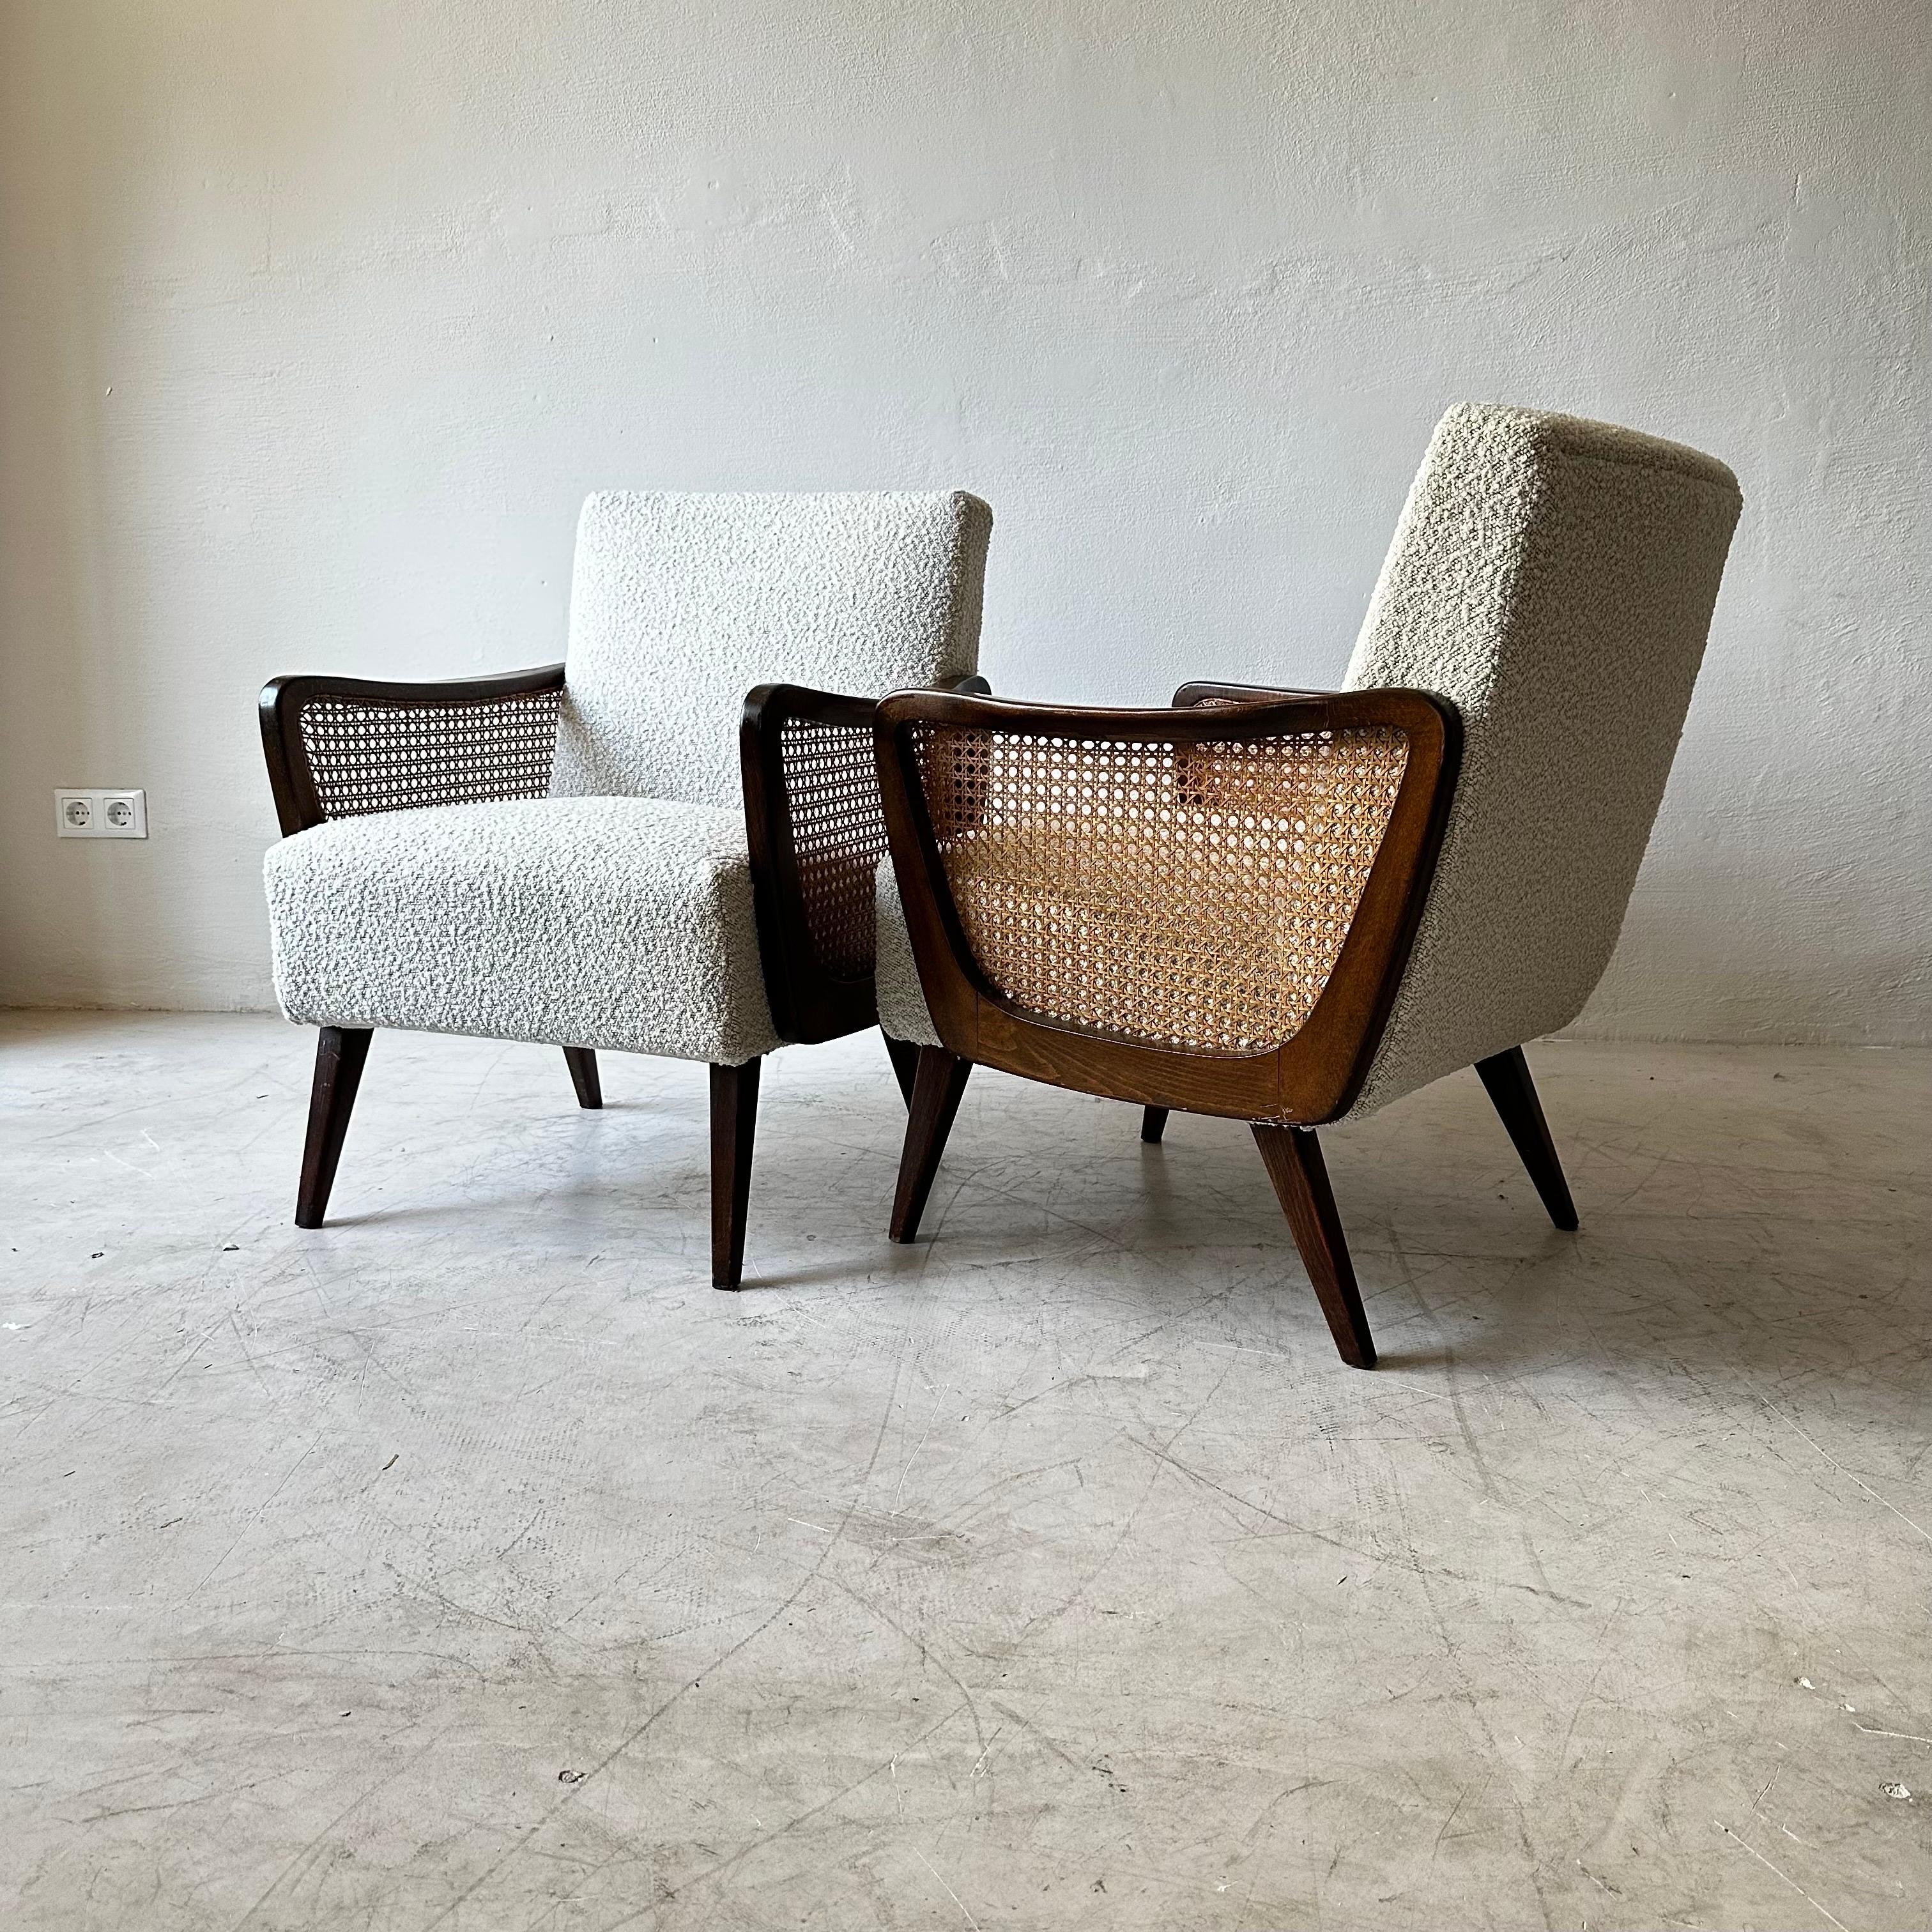 Organic Modern Austrian Arm Chairs in Boucle and Wicker, 1950s For Sale